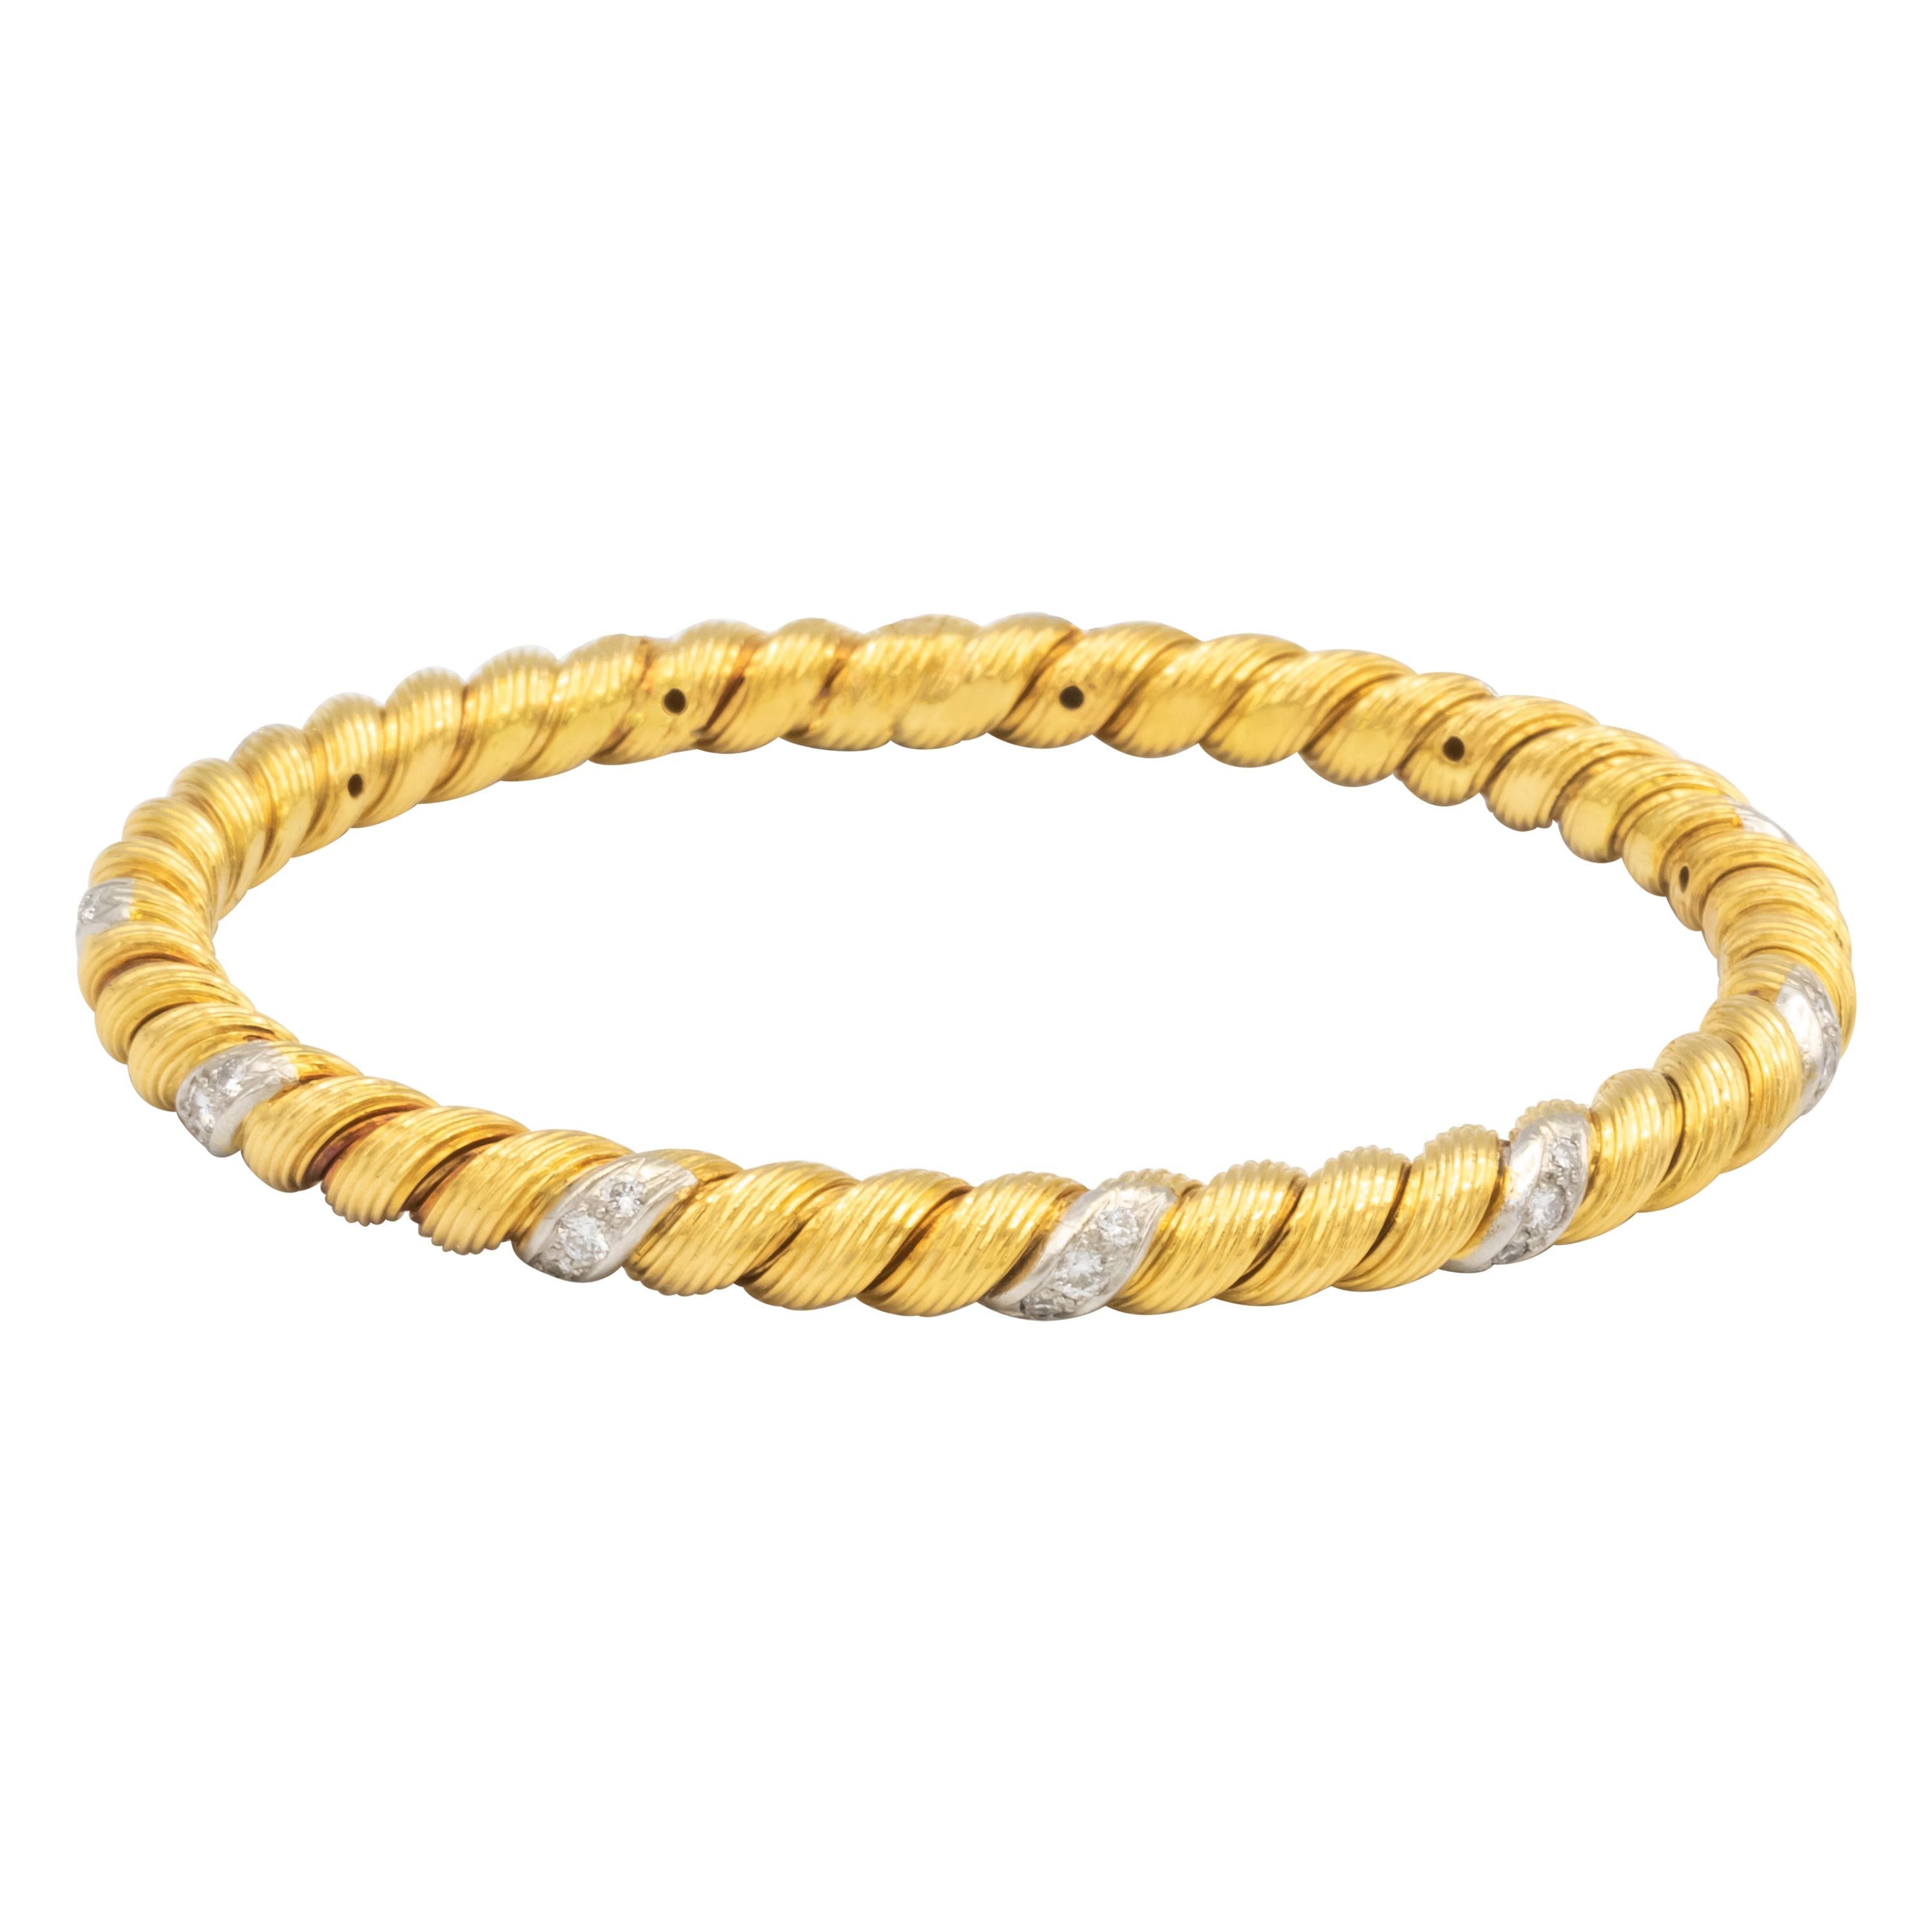 Van Cleef & Arpels Braided Yellow Gold and Diamonds Stackable Bangle Bracelet